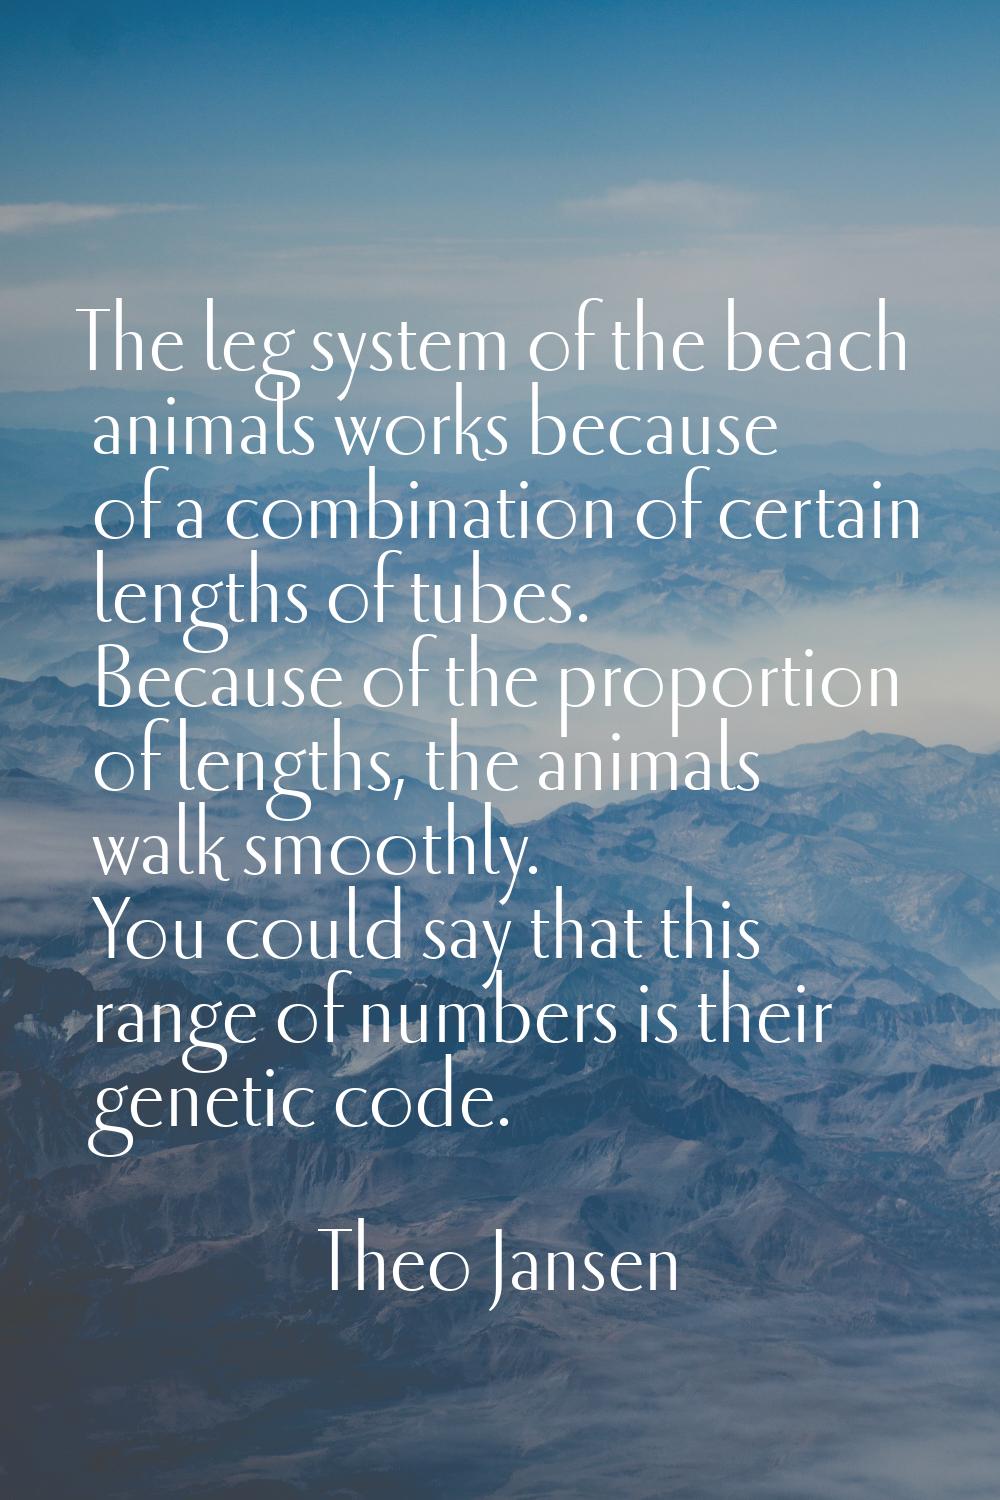 The leg system of the beach animals works because of a combination of certain lengths of tubes. Bec